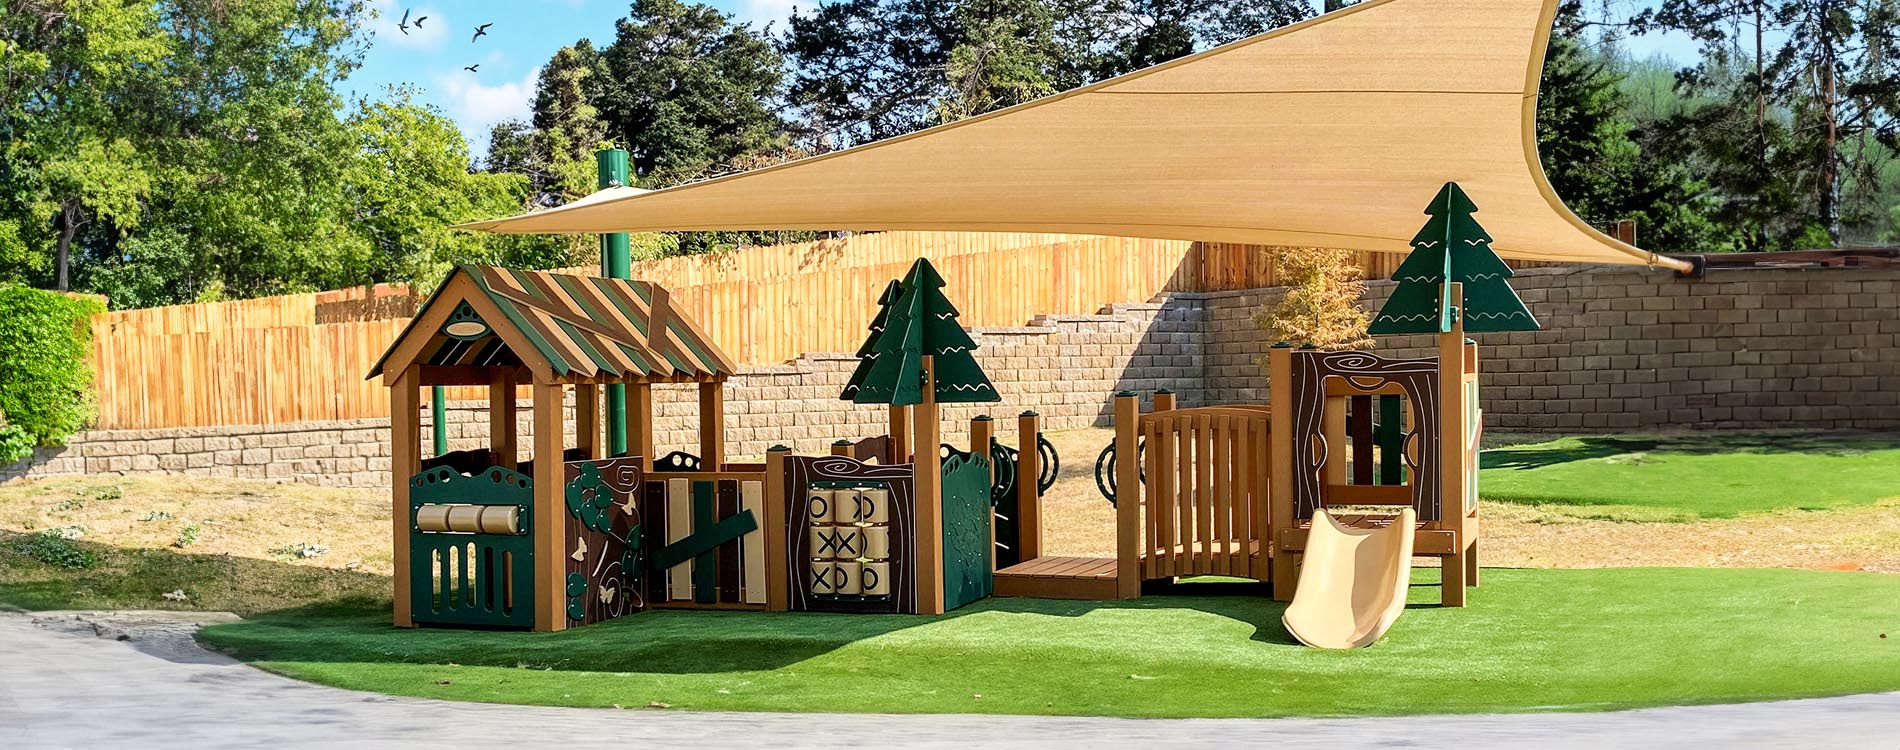 Playset For Toddlers